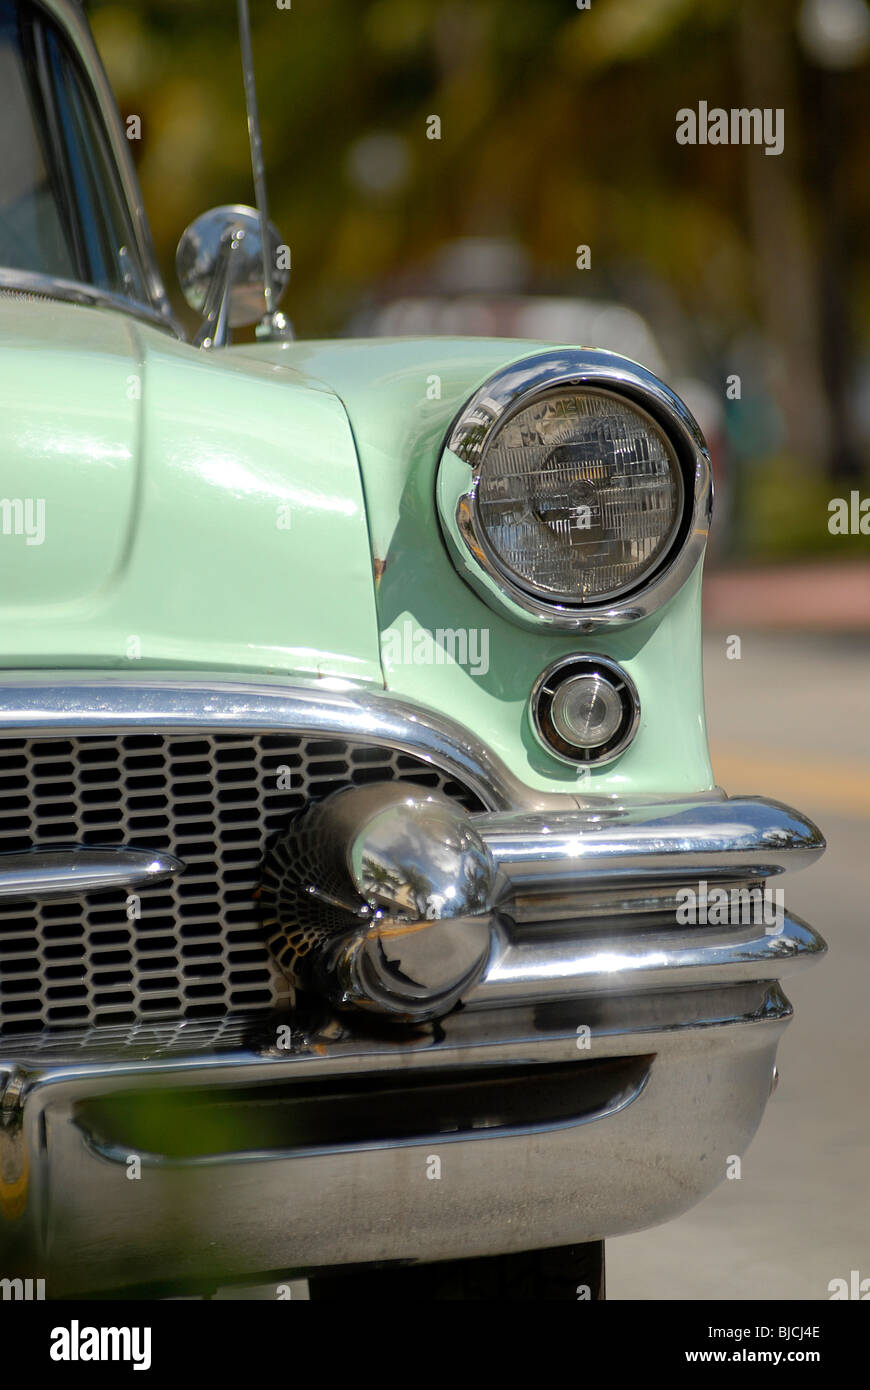 DETAIL OF 1950'S BUICK, ON OCEAN DRIVE, BY SOUTH BEACH, MIAMI. Stock Photo